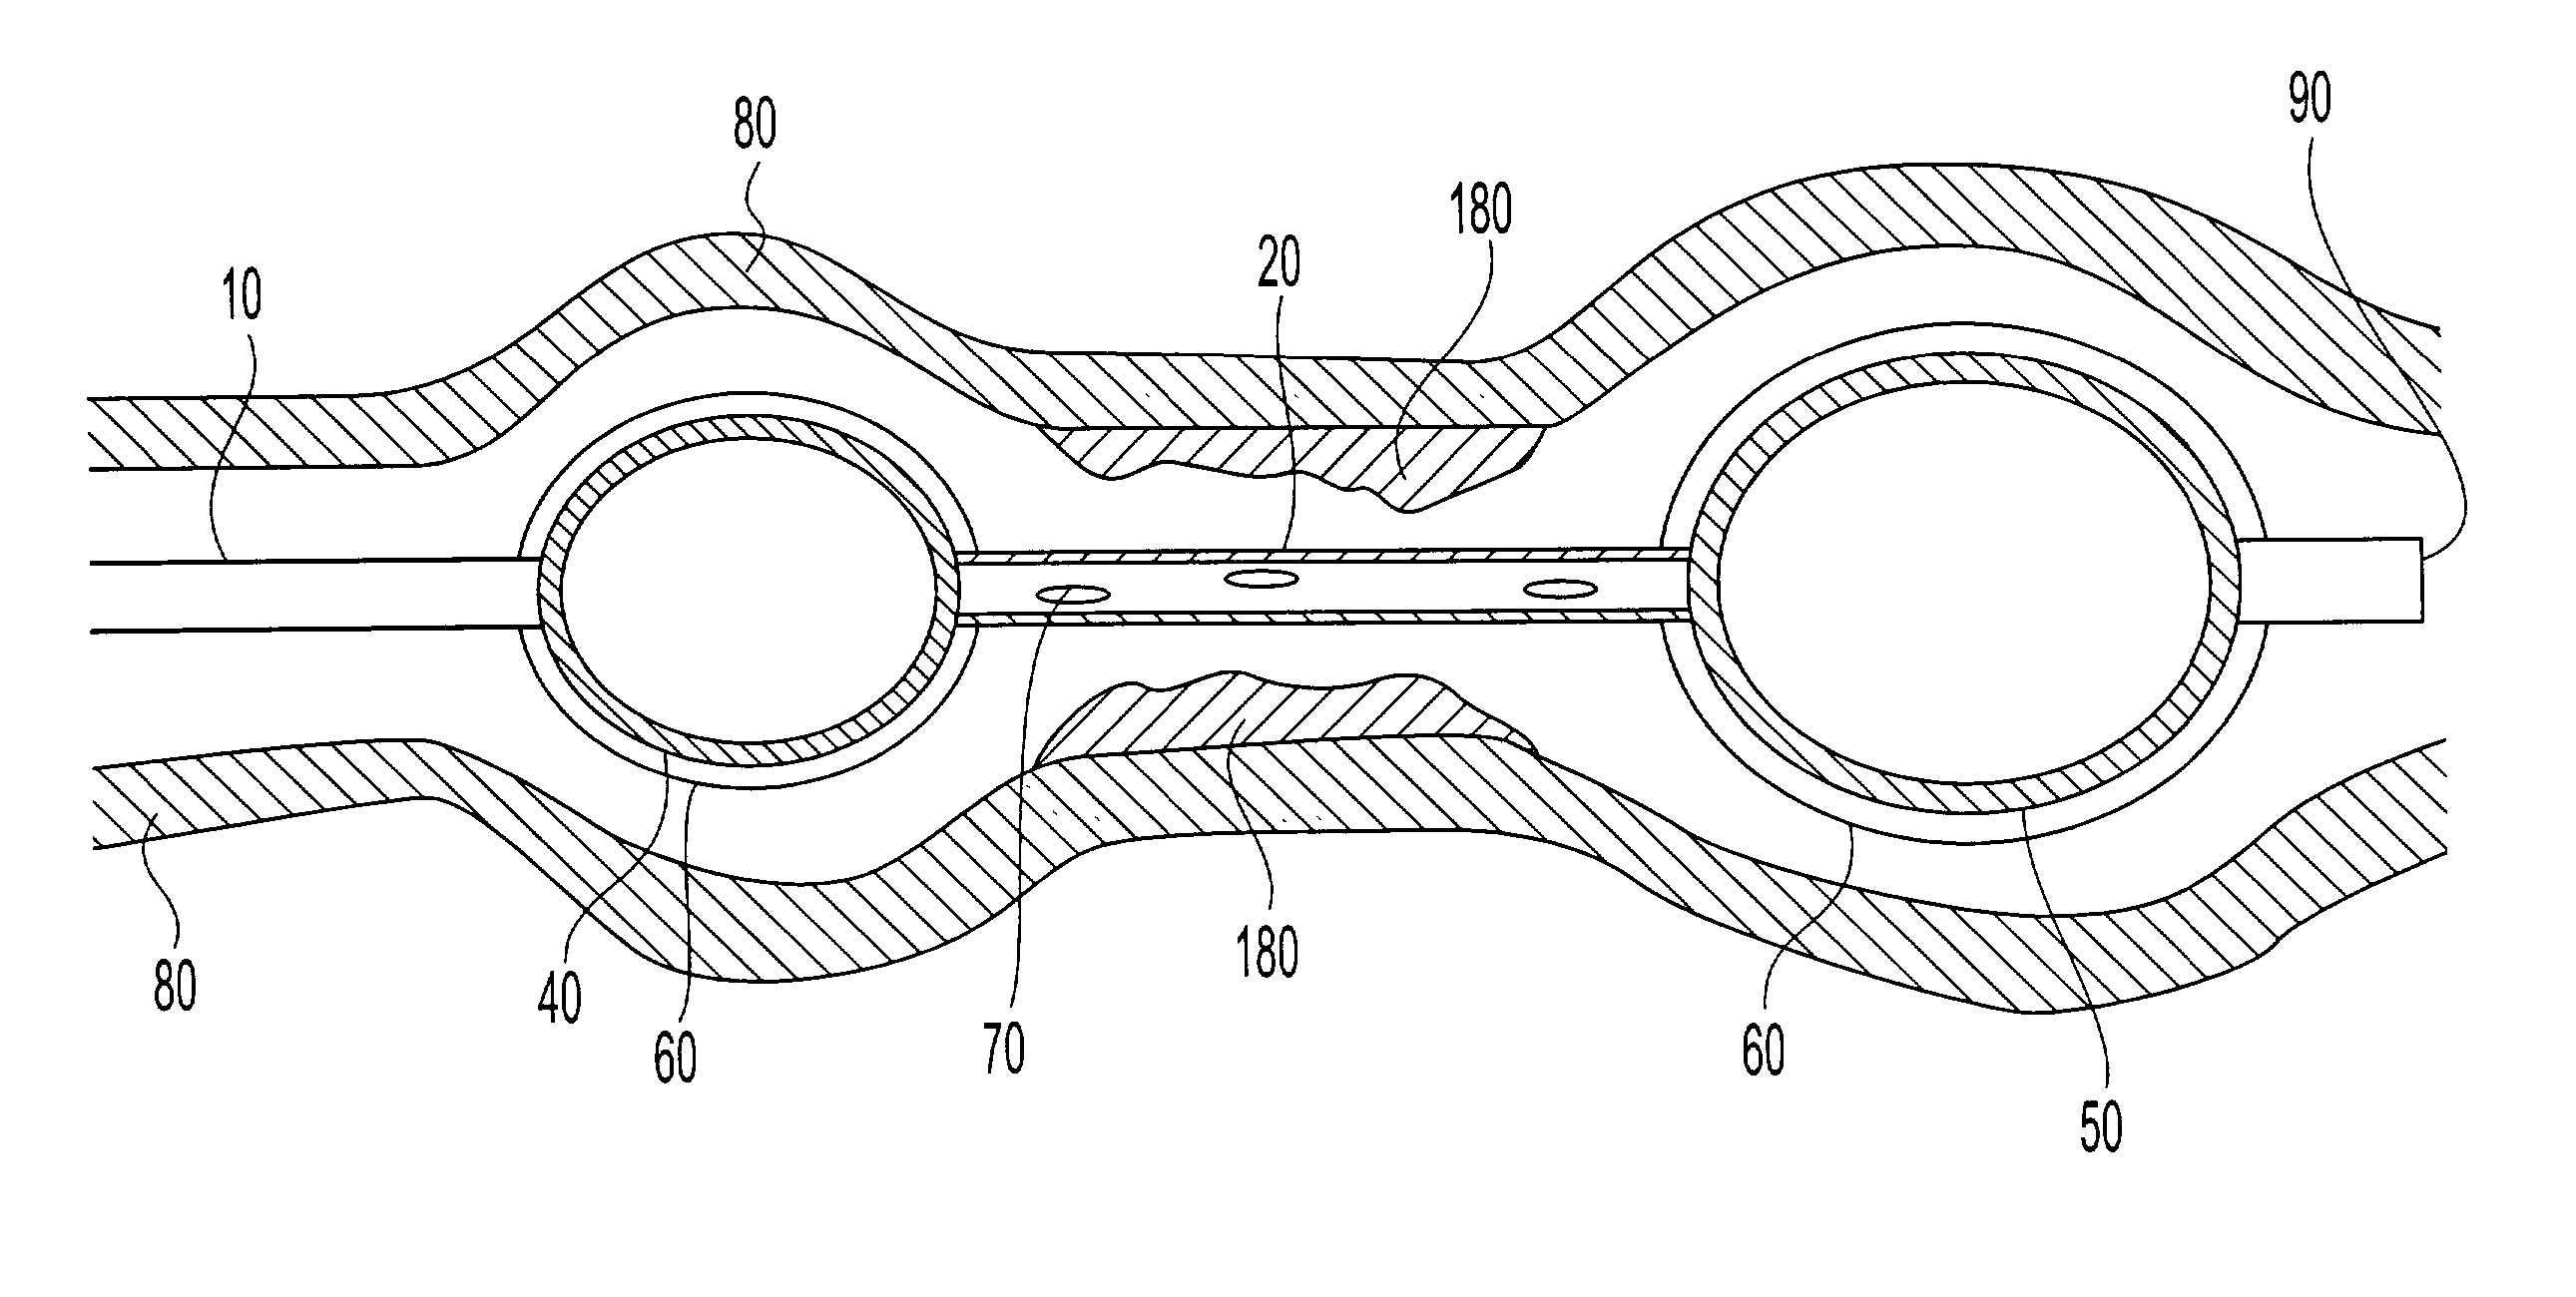 Multi-balloon catheter with hydrogel coating